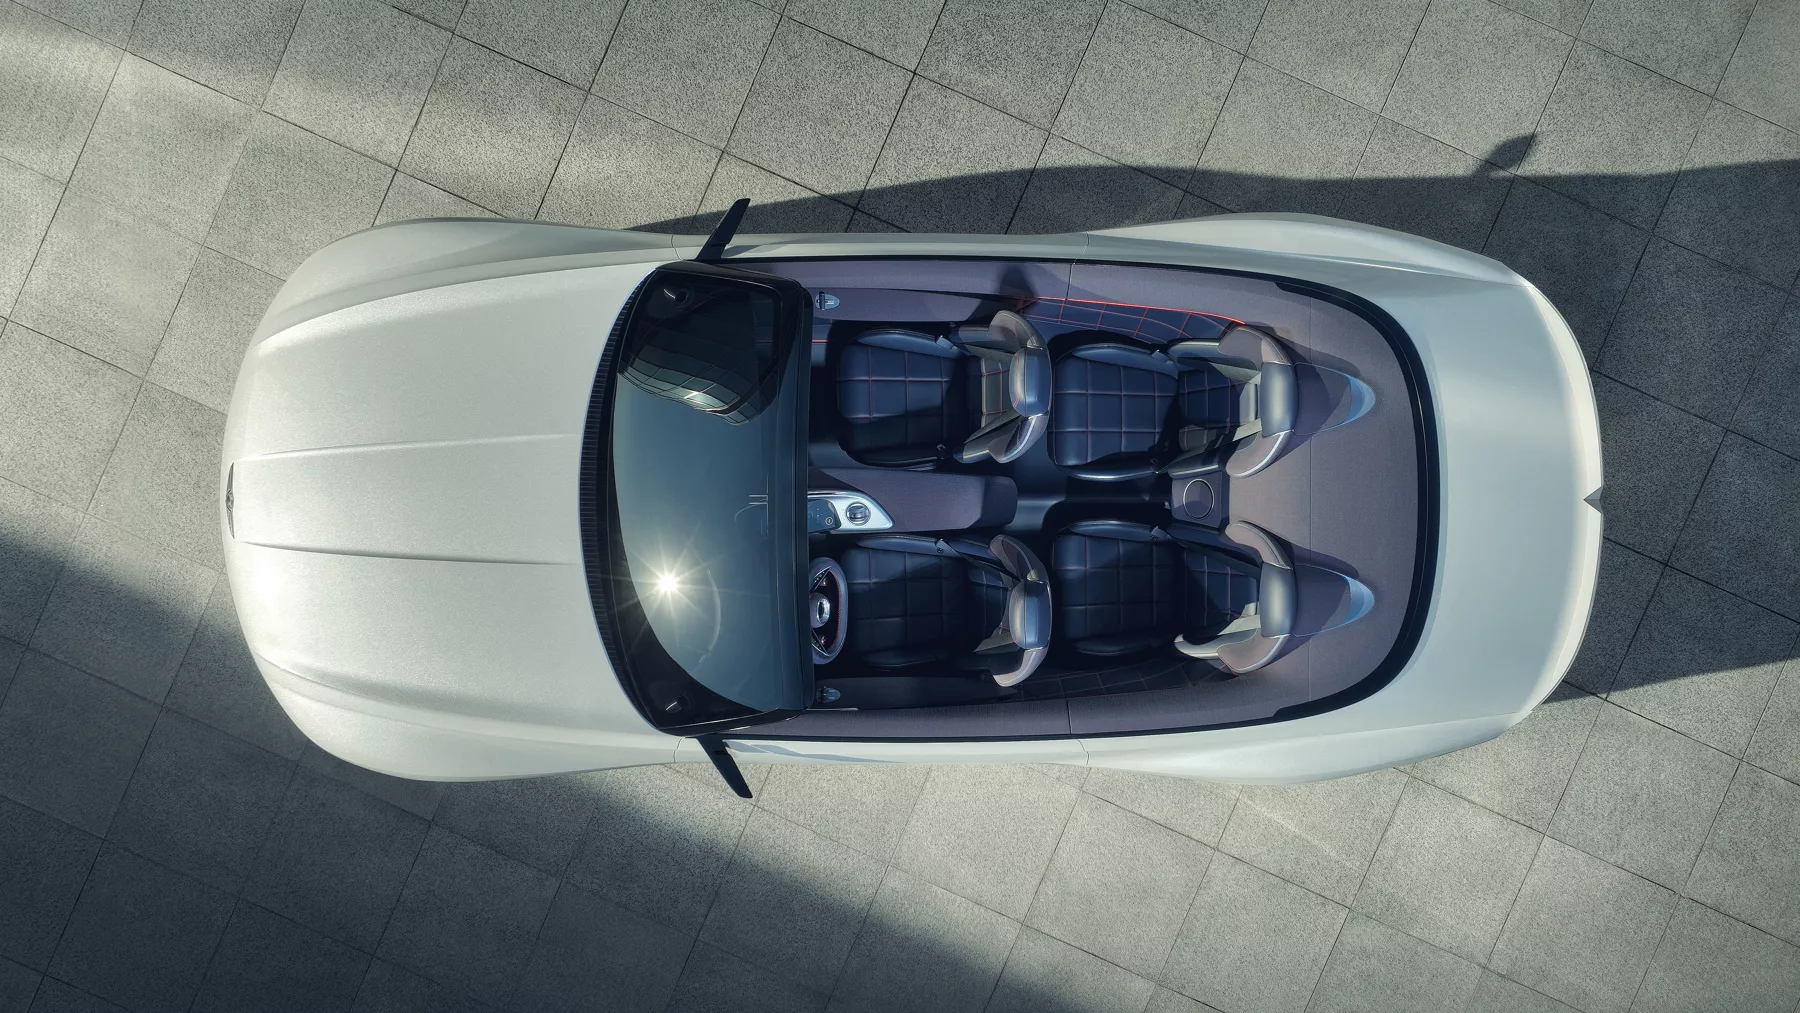 View of X Convertible Concept from above, with the convertible top down and displaying the four seats inside.